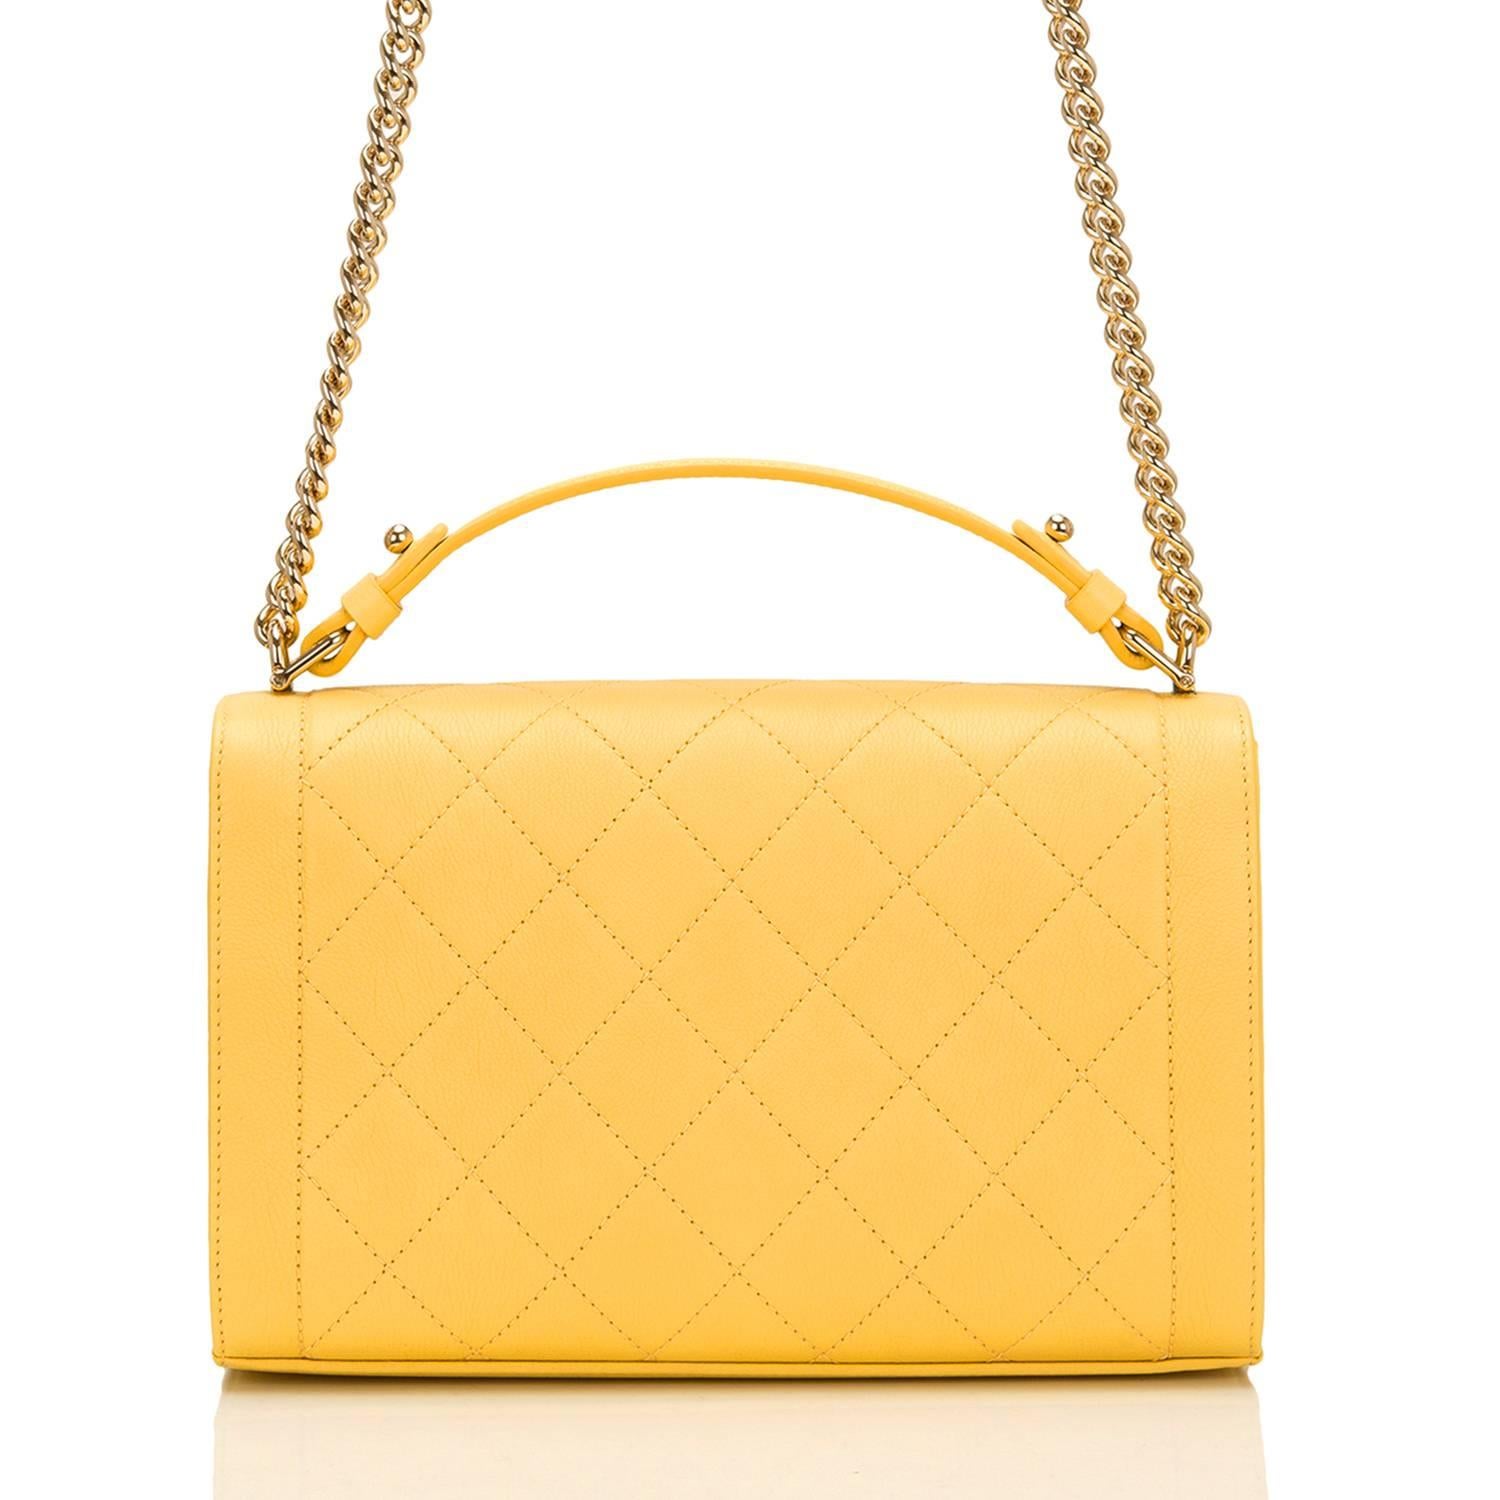 yellow chanel bag for sale